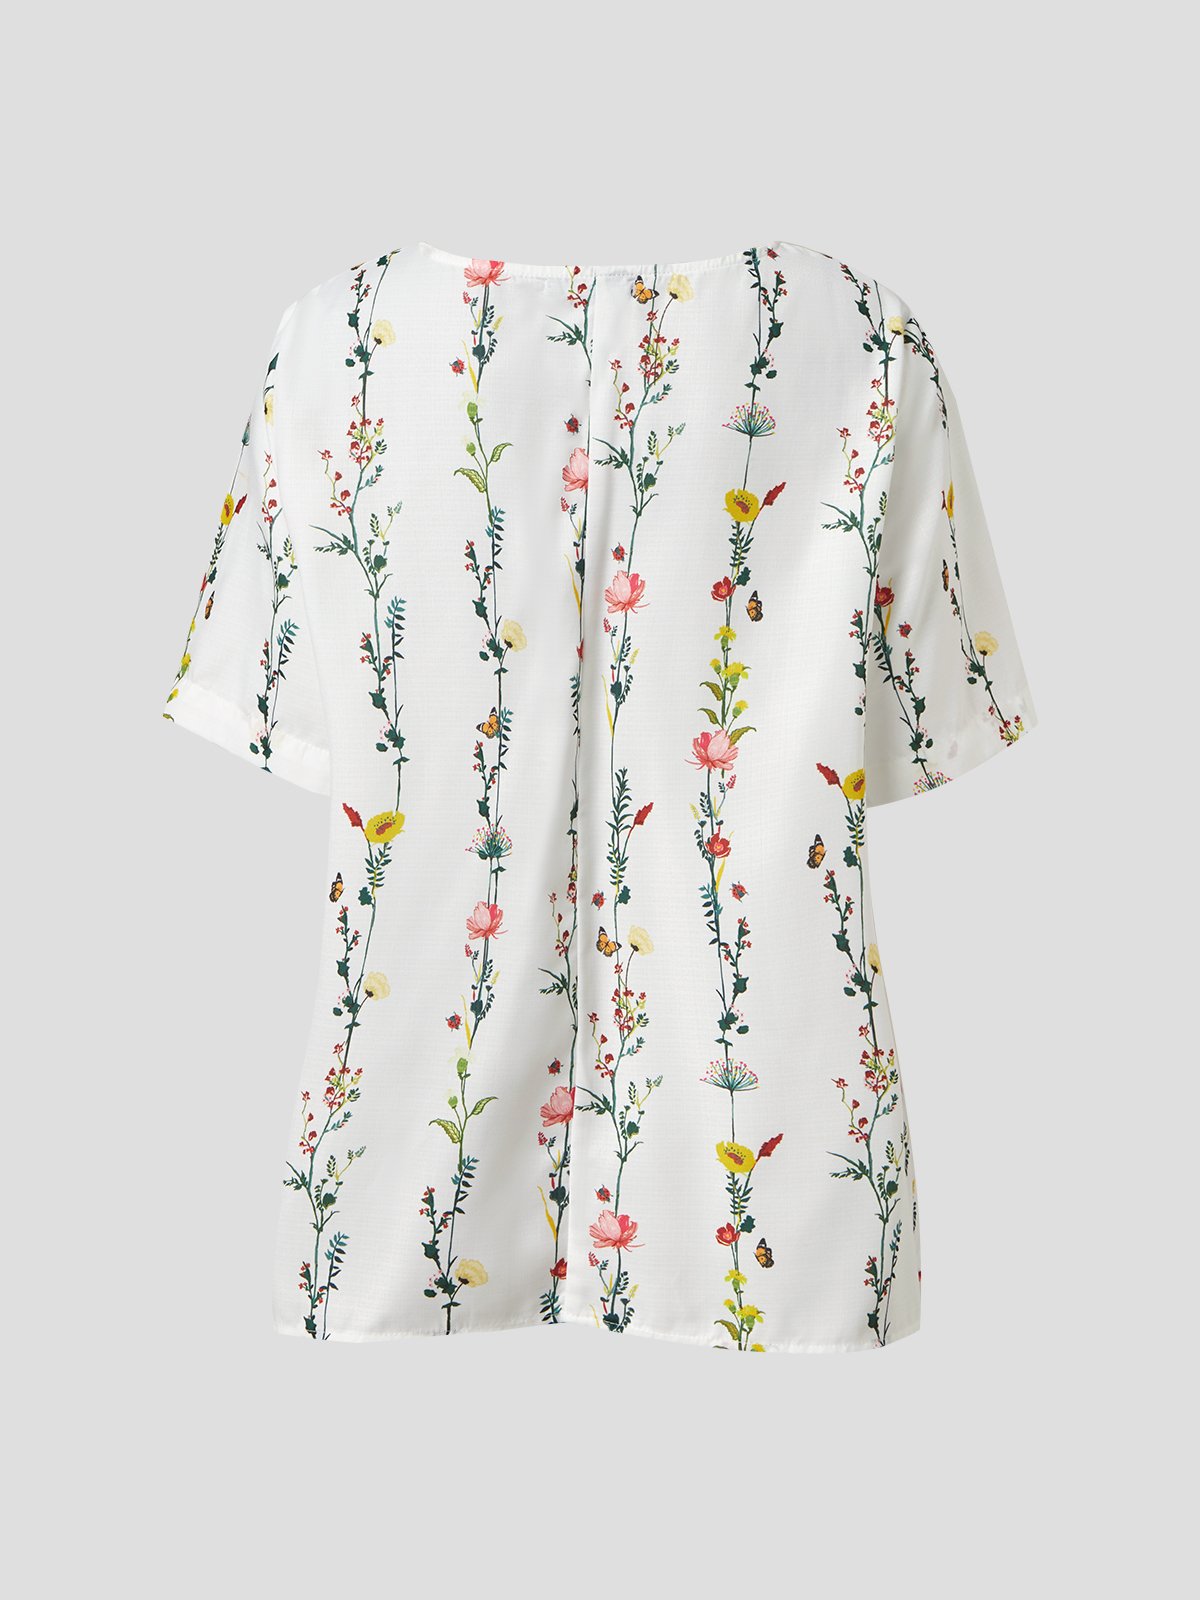 Floral Crew Neck Casual Shirts & Blouses